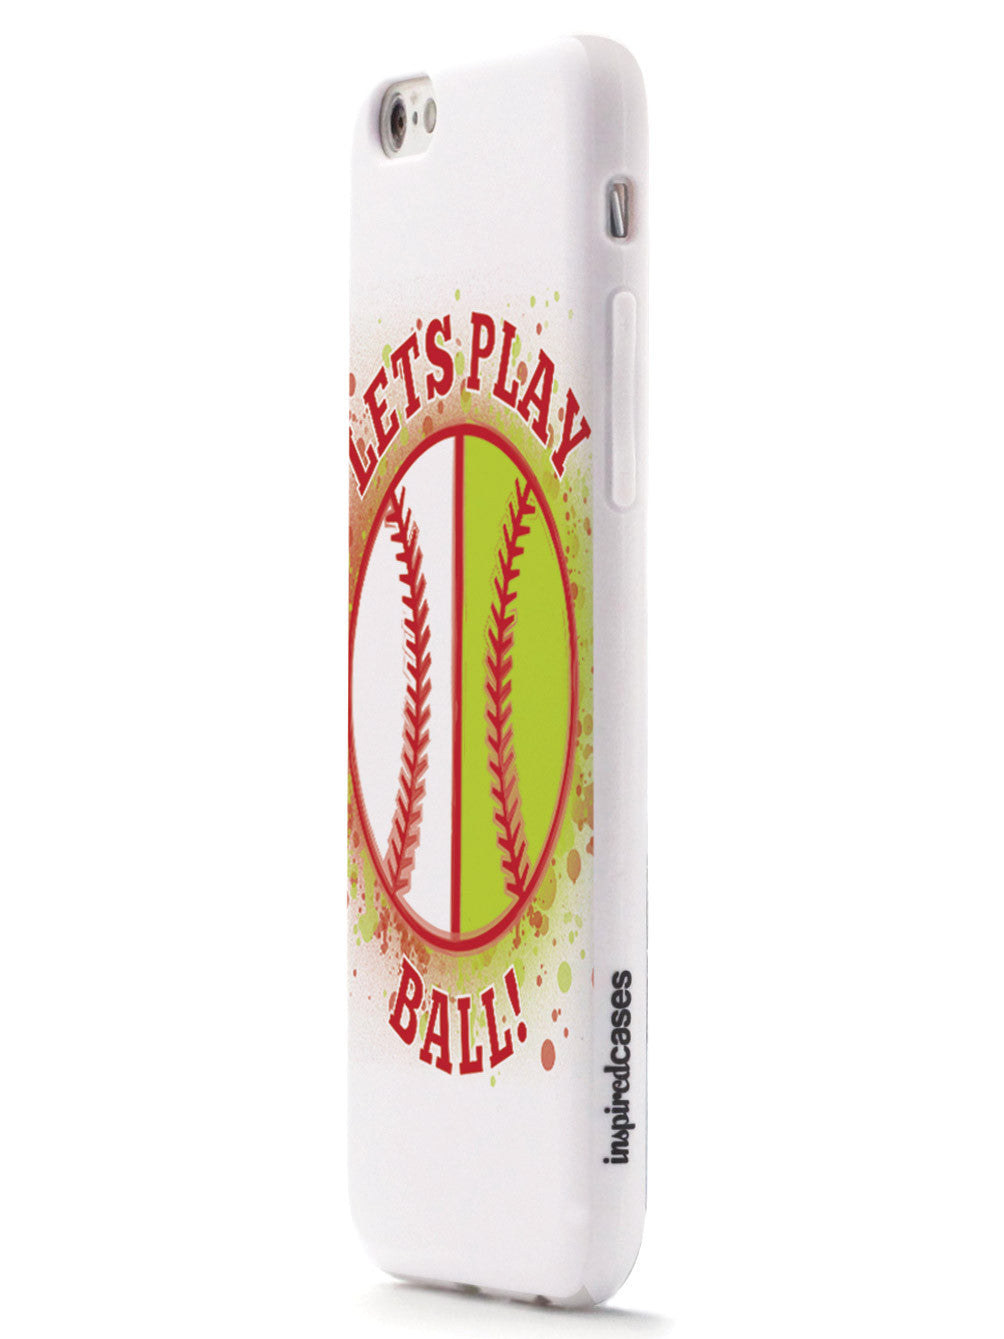 Let's Play Ball Case